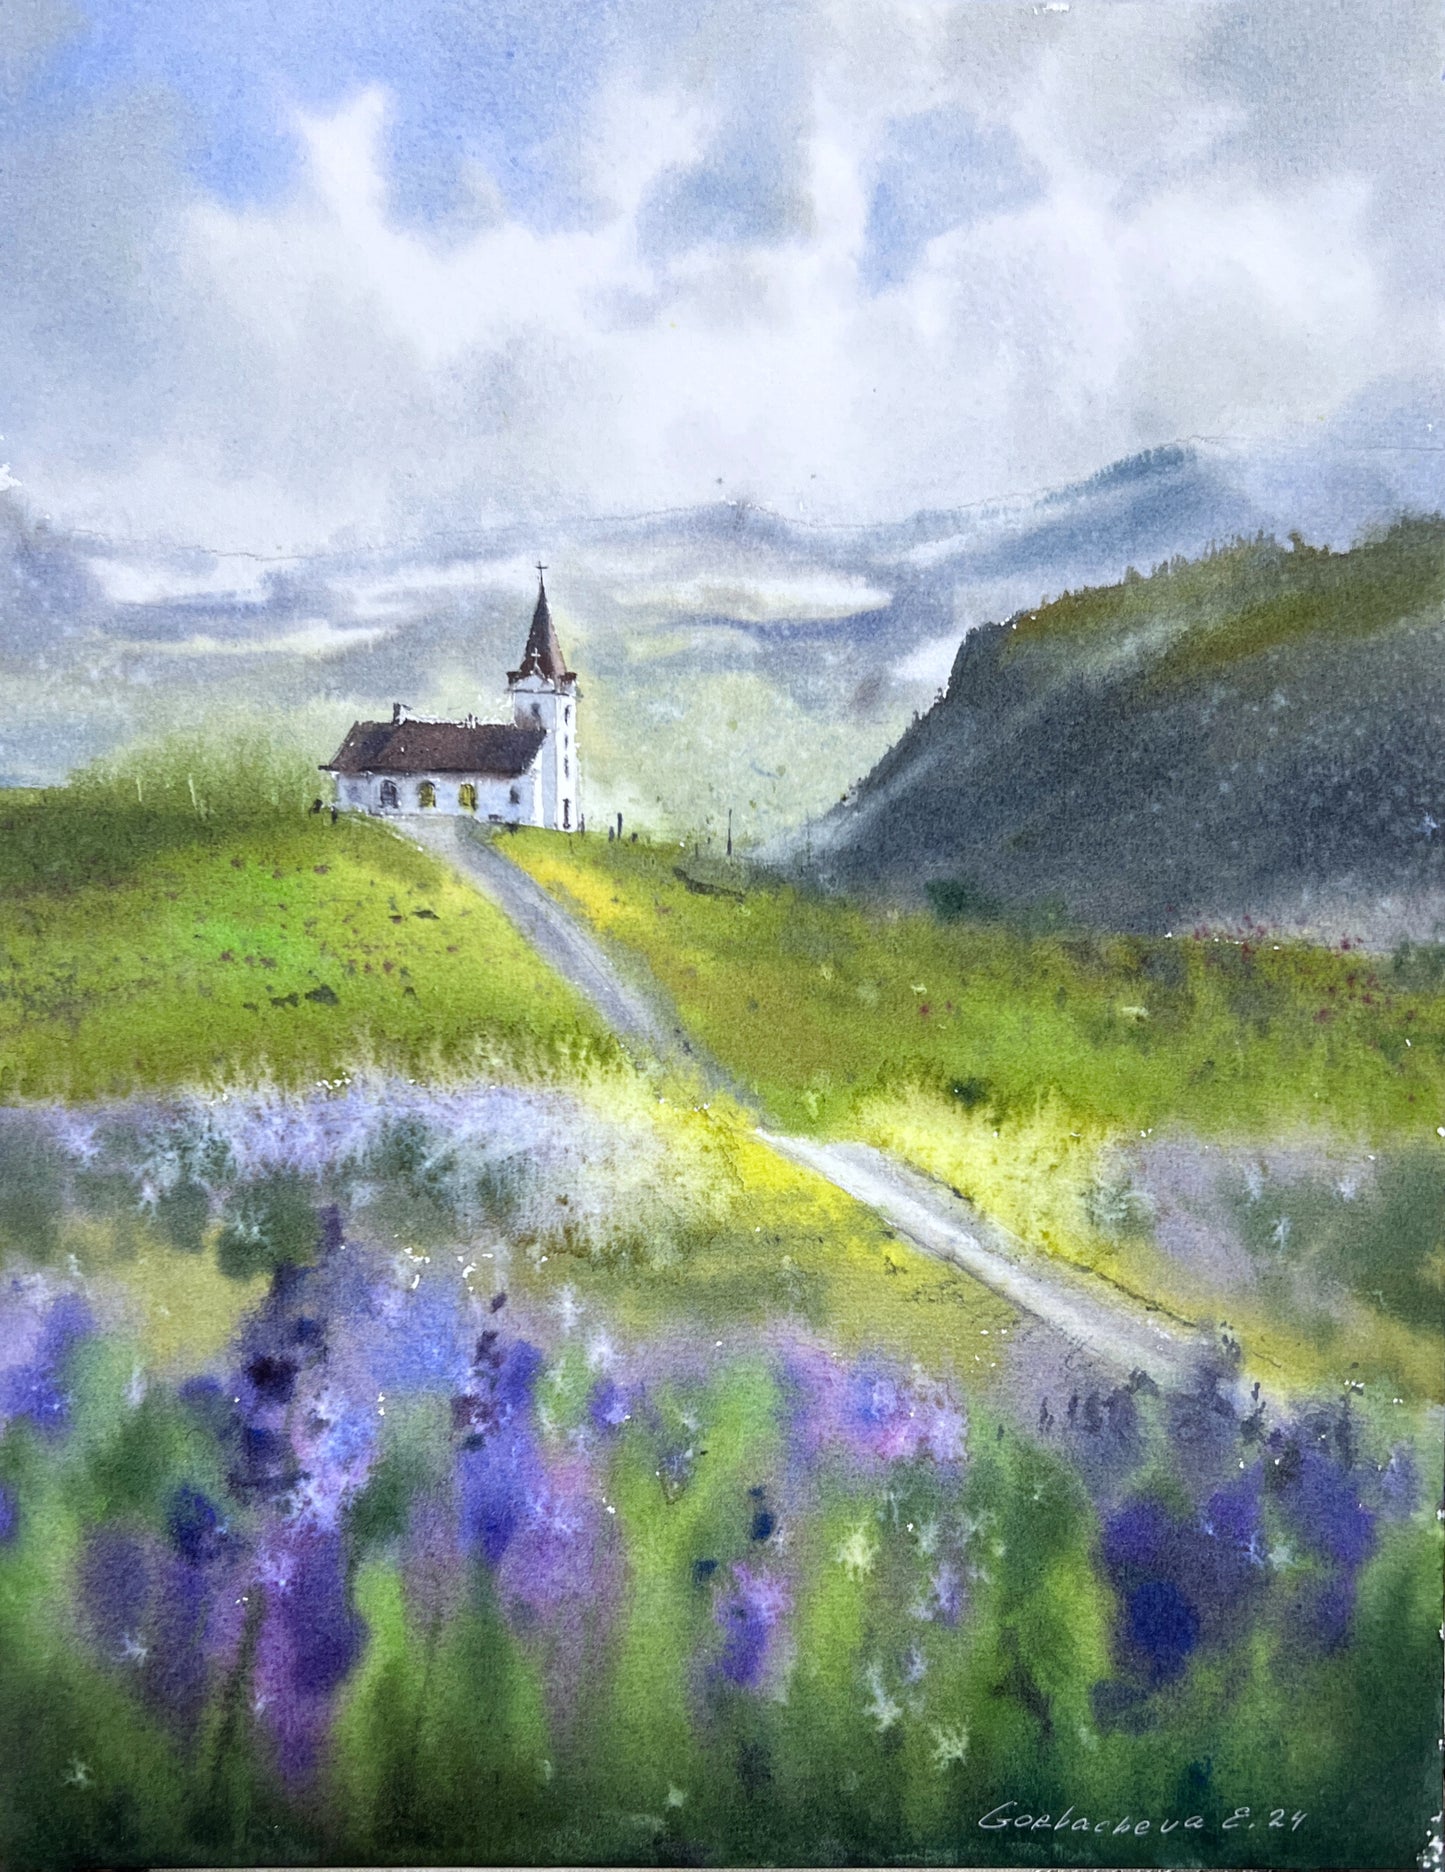 Watercolor Painting of Church in The Mountains, Spring Landscape, Home Wall Art, Original Artwork, Lilac Flower Field